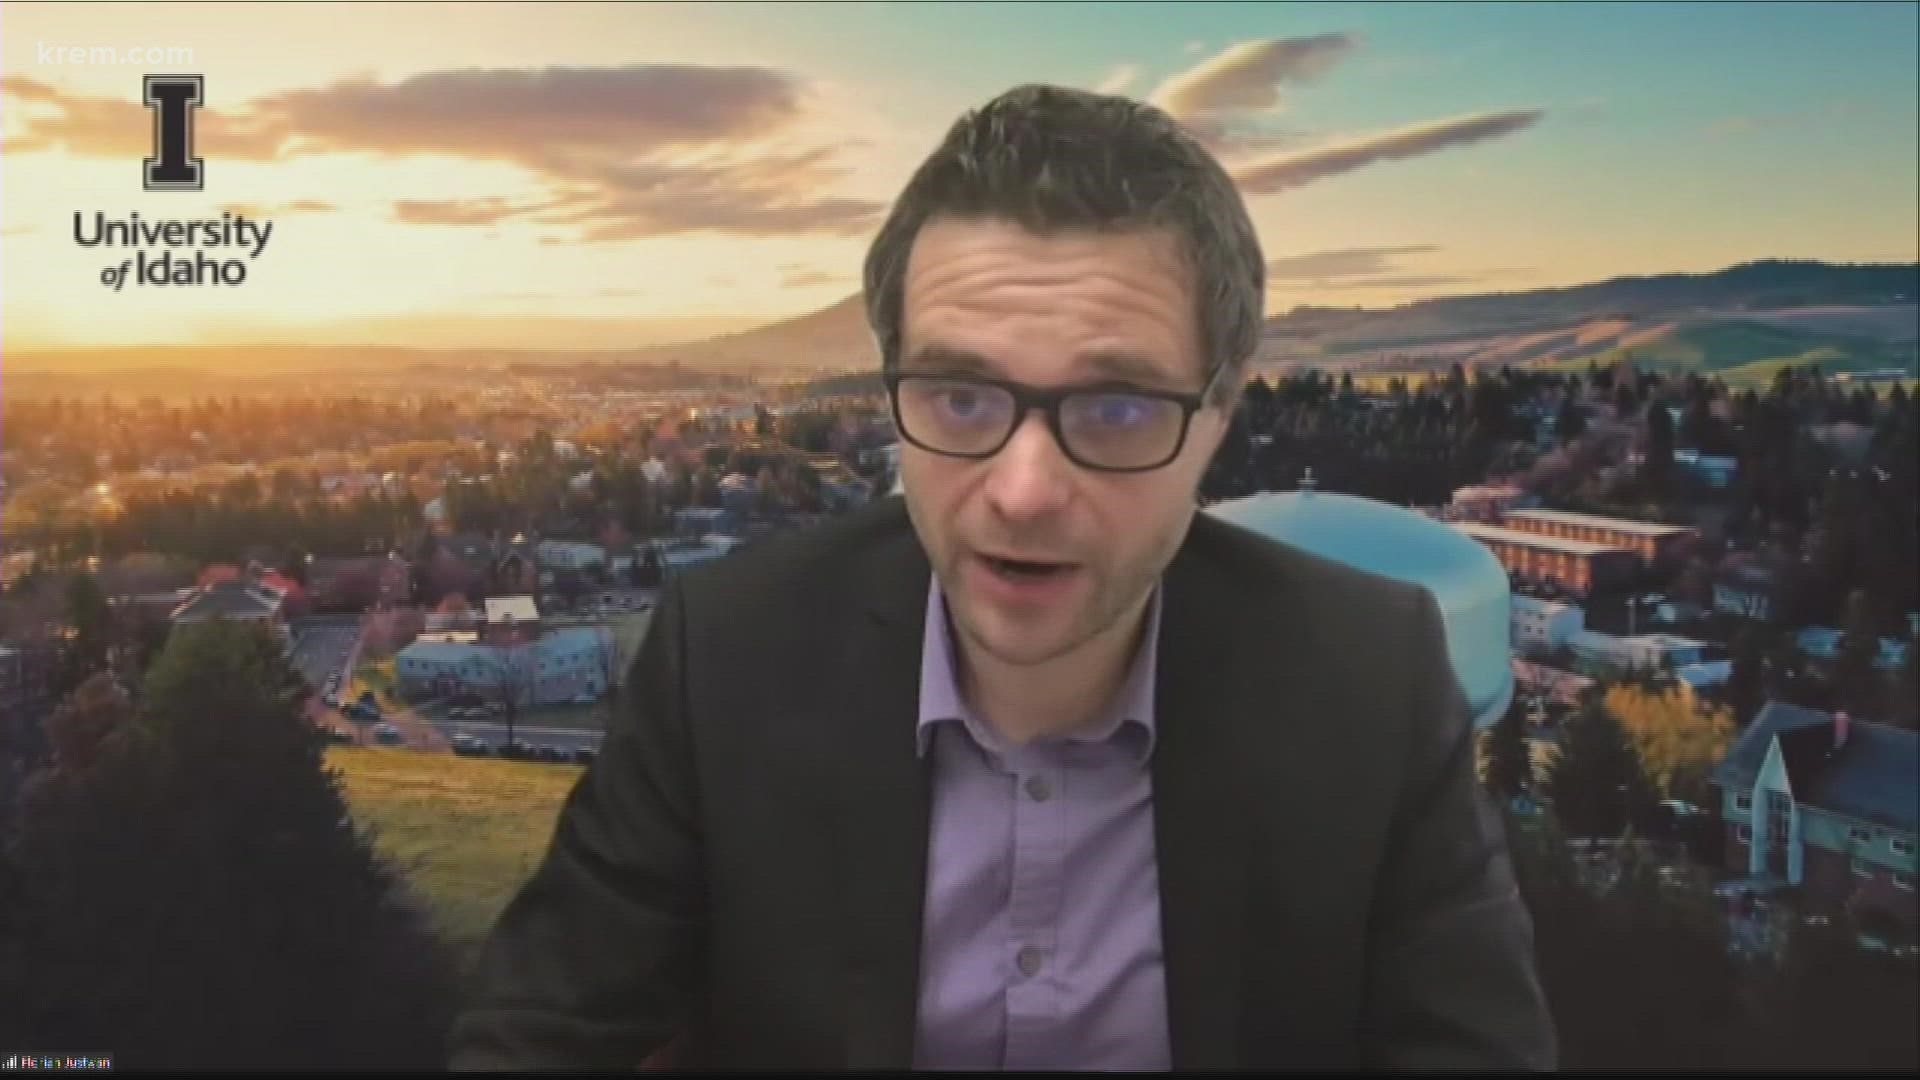 Florian Justwan, an associate professor of political science at the University of Idaho, joins KREM 2 to answer questions about the crisis in Ukraine.